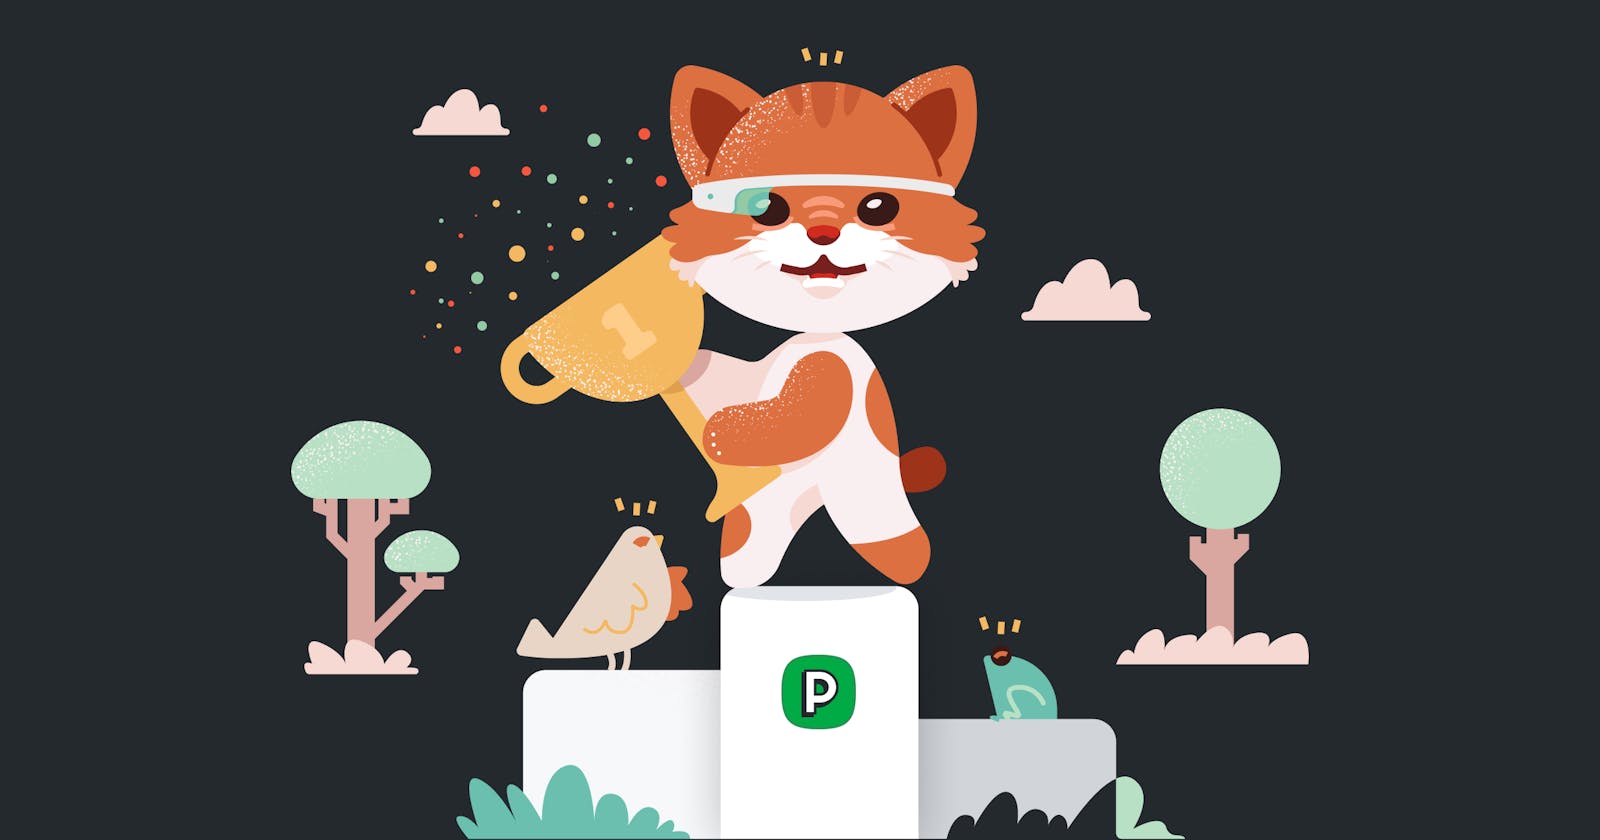 How we nailed our Product Hunt launch